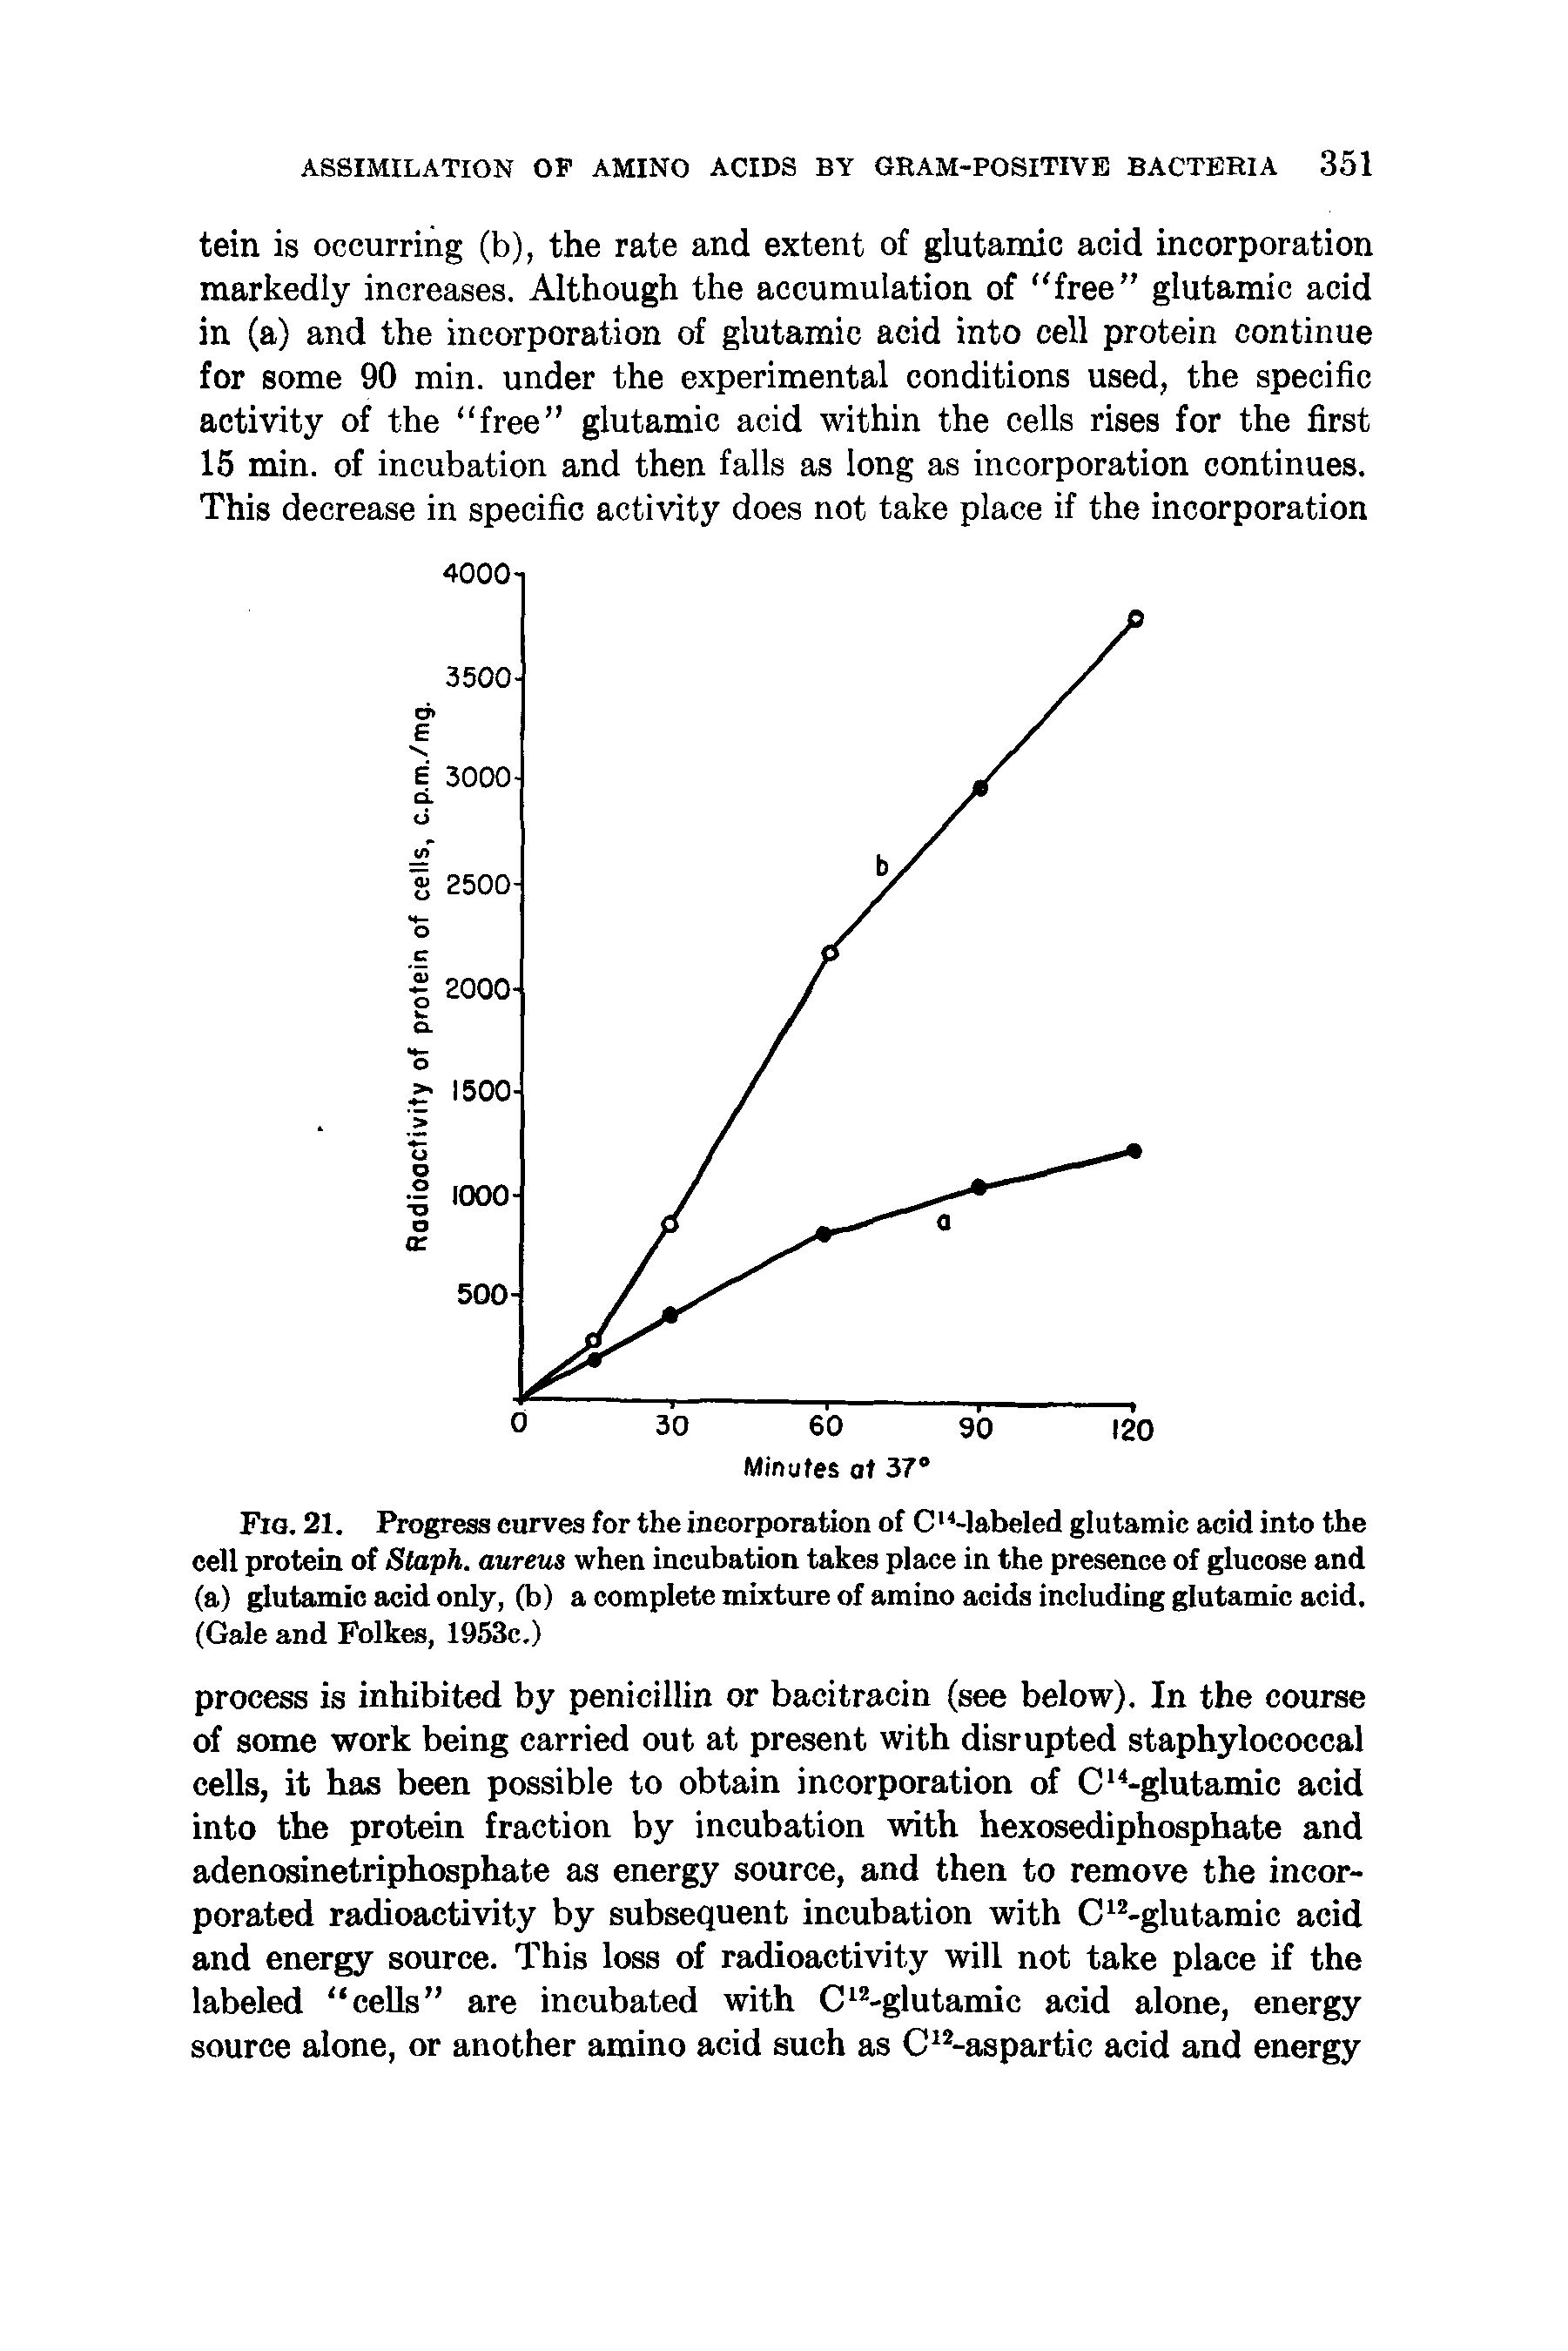 Fig. 21. Progress curves for the incorporation of C Mabeled glutamic acid into the cell protein of Staph, aureus when incubation takes place in the presence of glucose and (a) glutamic acid only, (b) a complete mixture of amino acids including glutamic acid. (Gale and Folkes, 1953c.)...